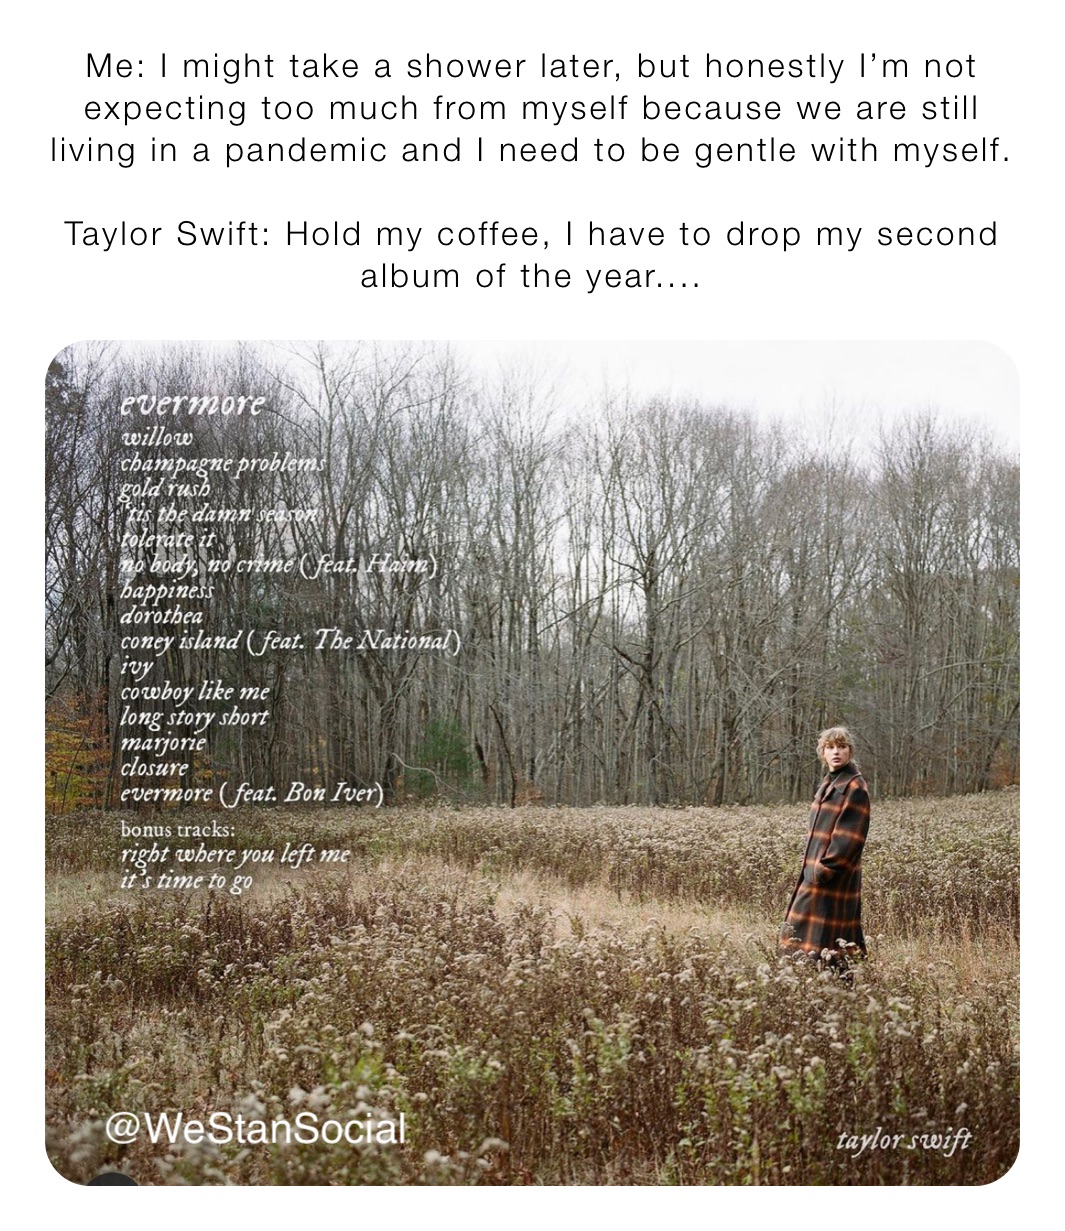 Me: I might take a shower later, but honestly I’m not expecting too much from myself because we are still living in a pandemic and I need to be gentle with myself.

Taylor Swift: Hold my coffee, I have to drop my second album of the year....